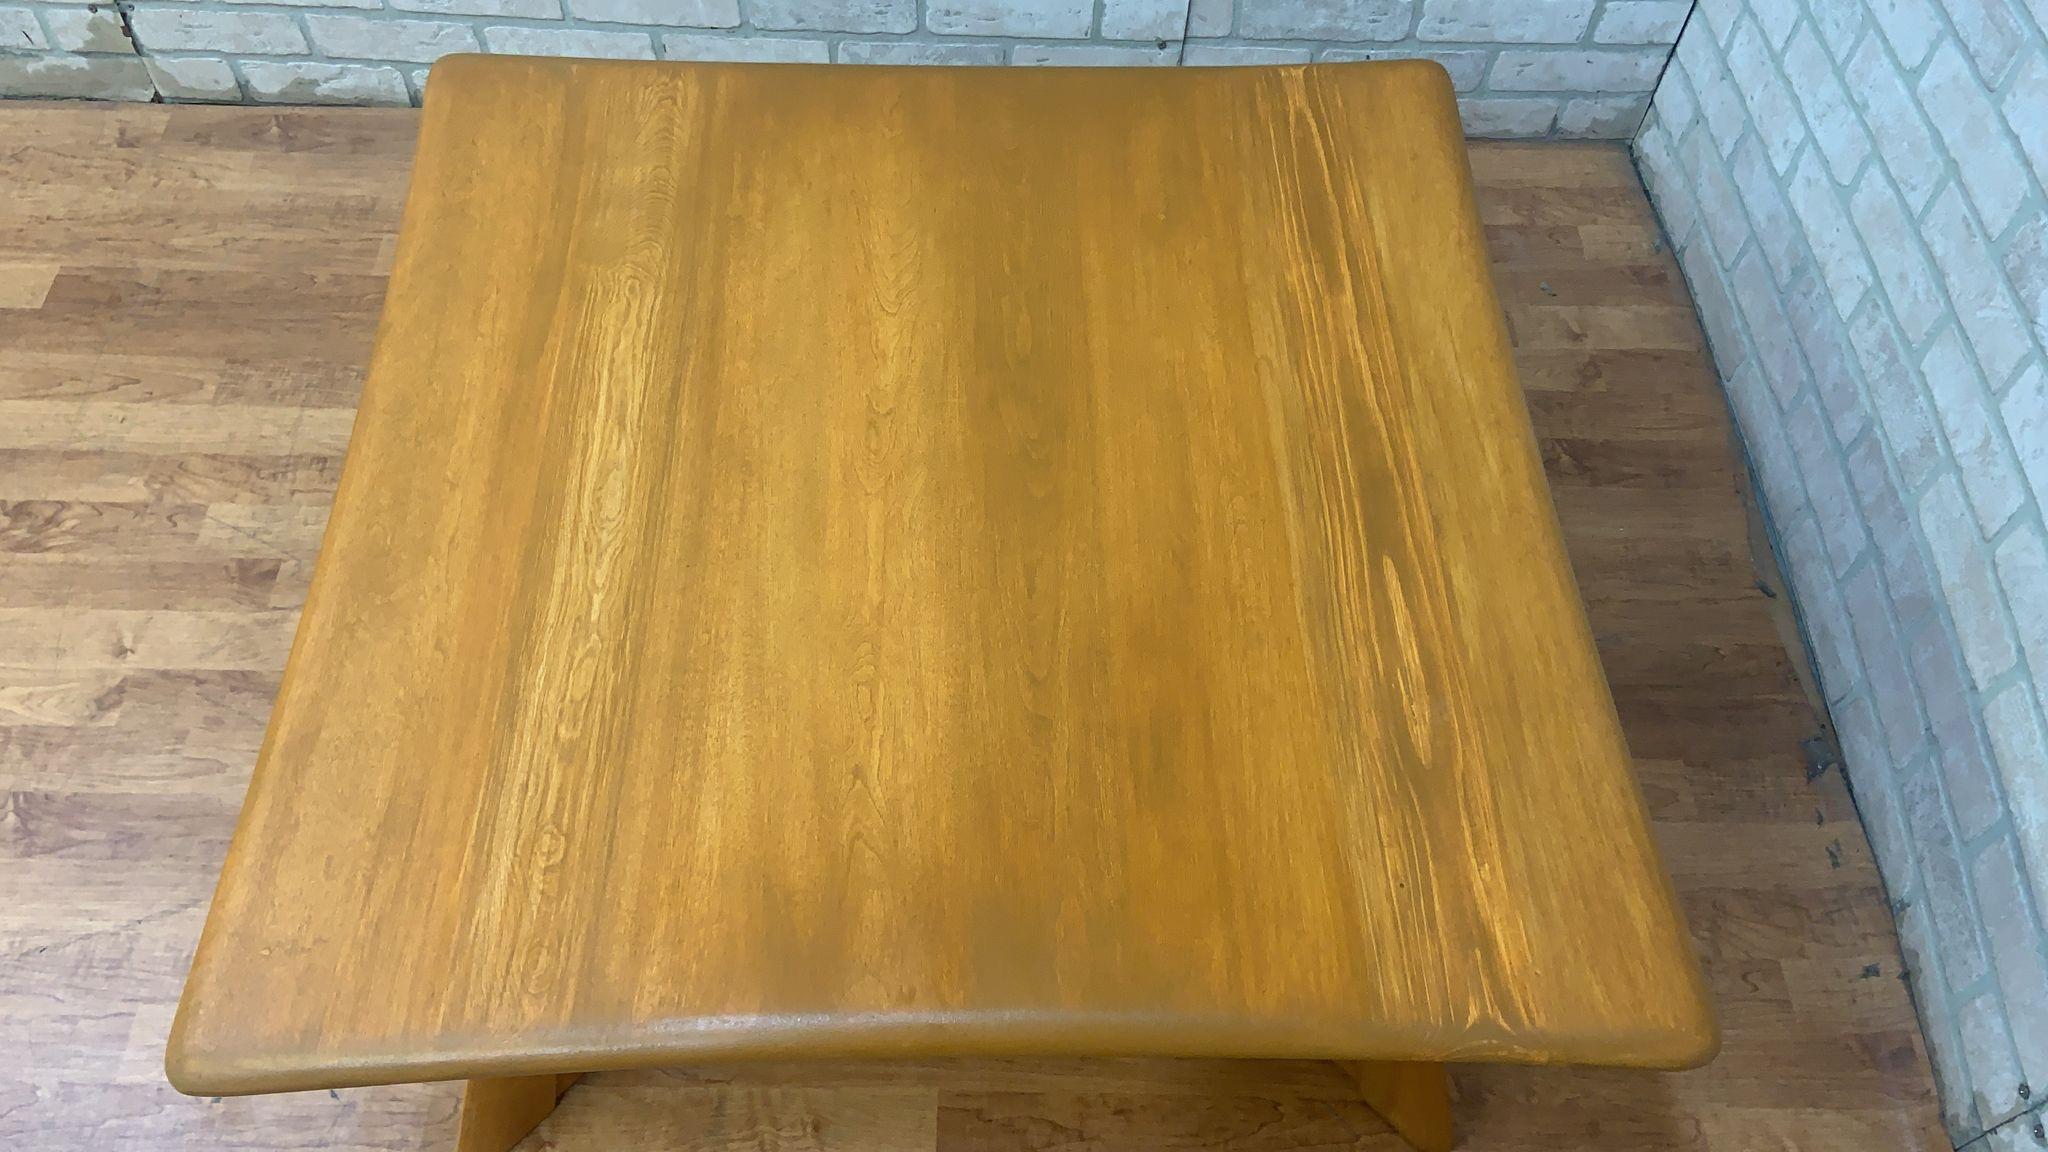 Mid Century Modern Heywood Wakefield X Base Square Coffee Table

The Heywood-Wakefield X Base Square Coffee Table is a classic piece of furniture that embodies the Mid-Century Modern design aesthetic. It features a square tabletop crafted from